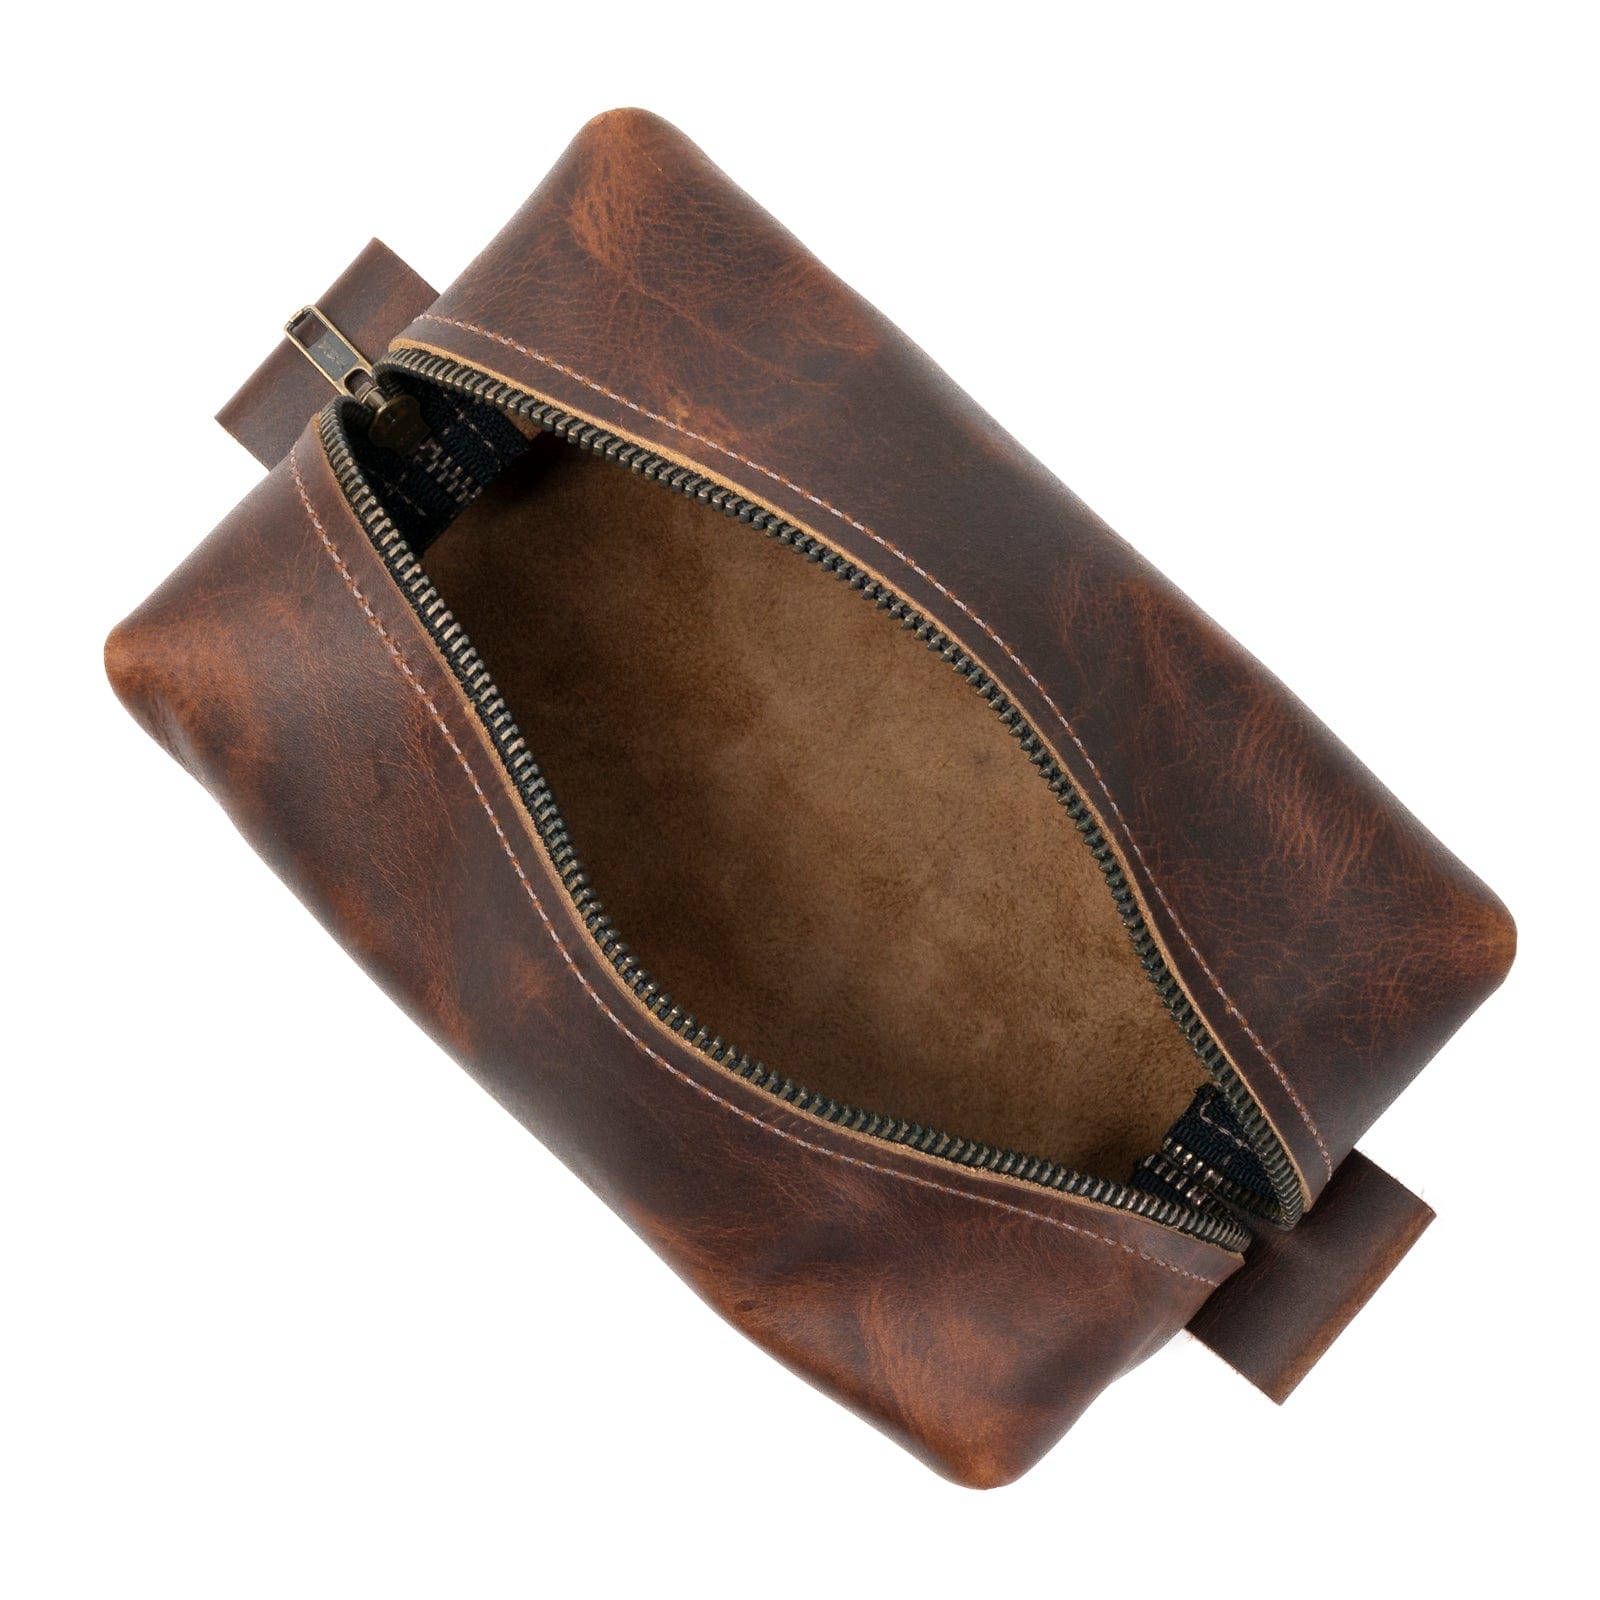 Leather Toiletry Bag - Heritage Brown Popov Leather